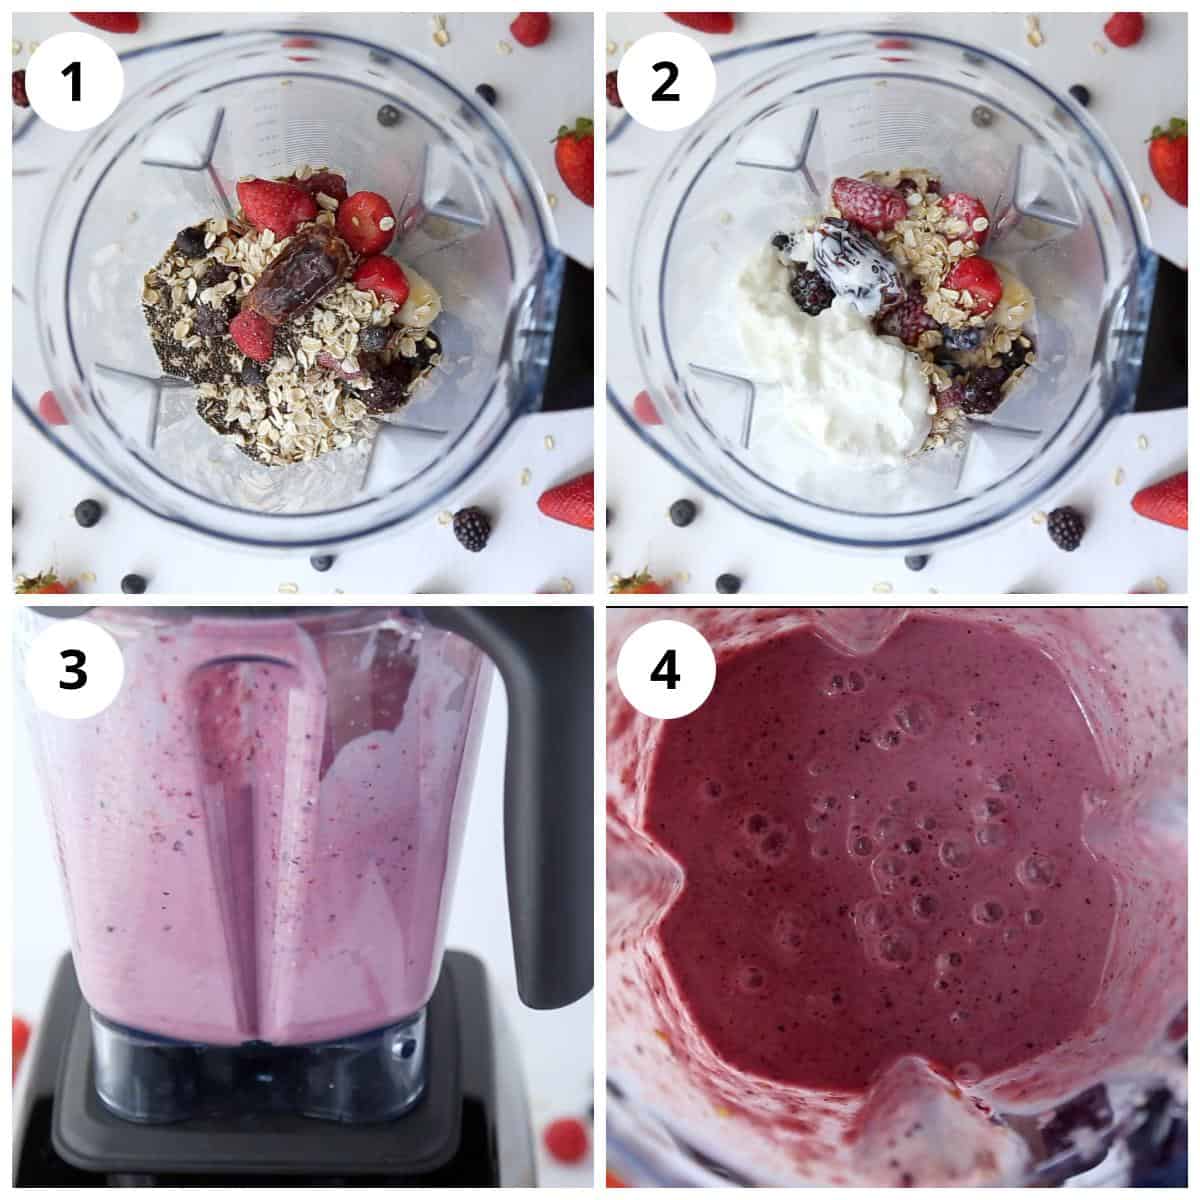 Steps for adding and blending ingredients for Berry Oat smoothie